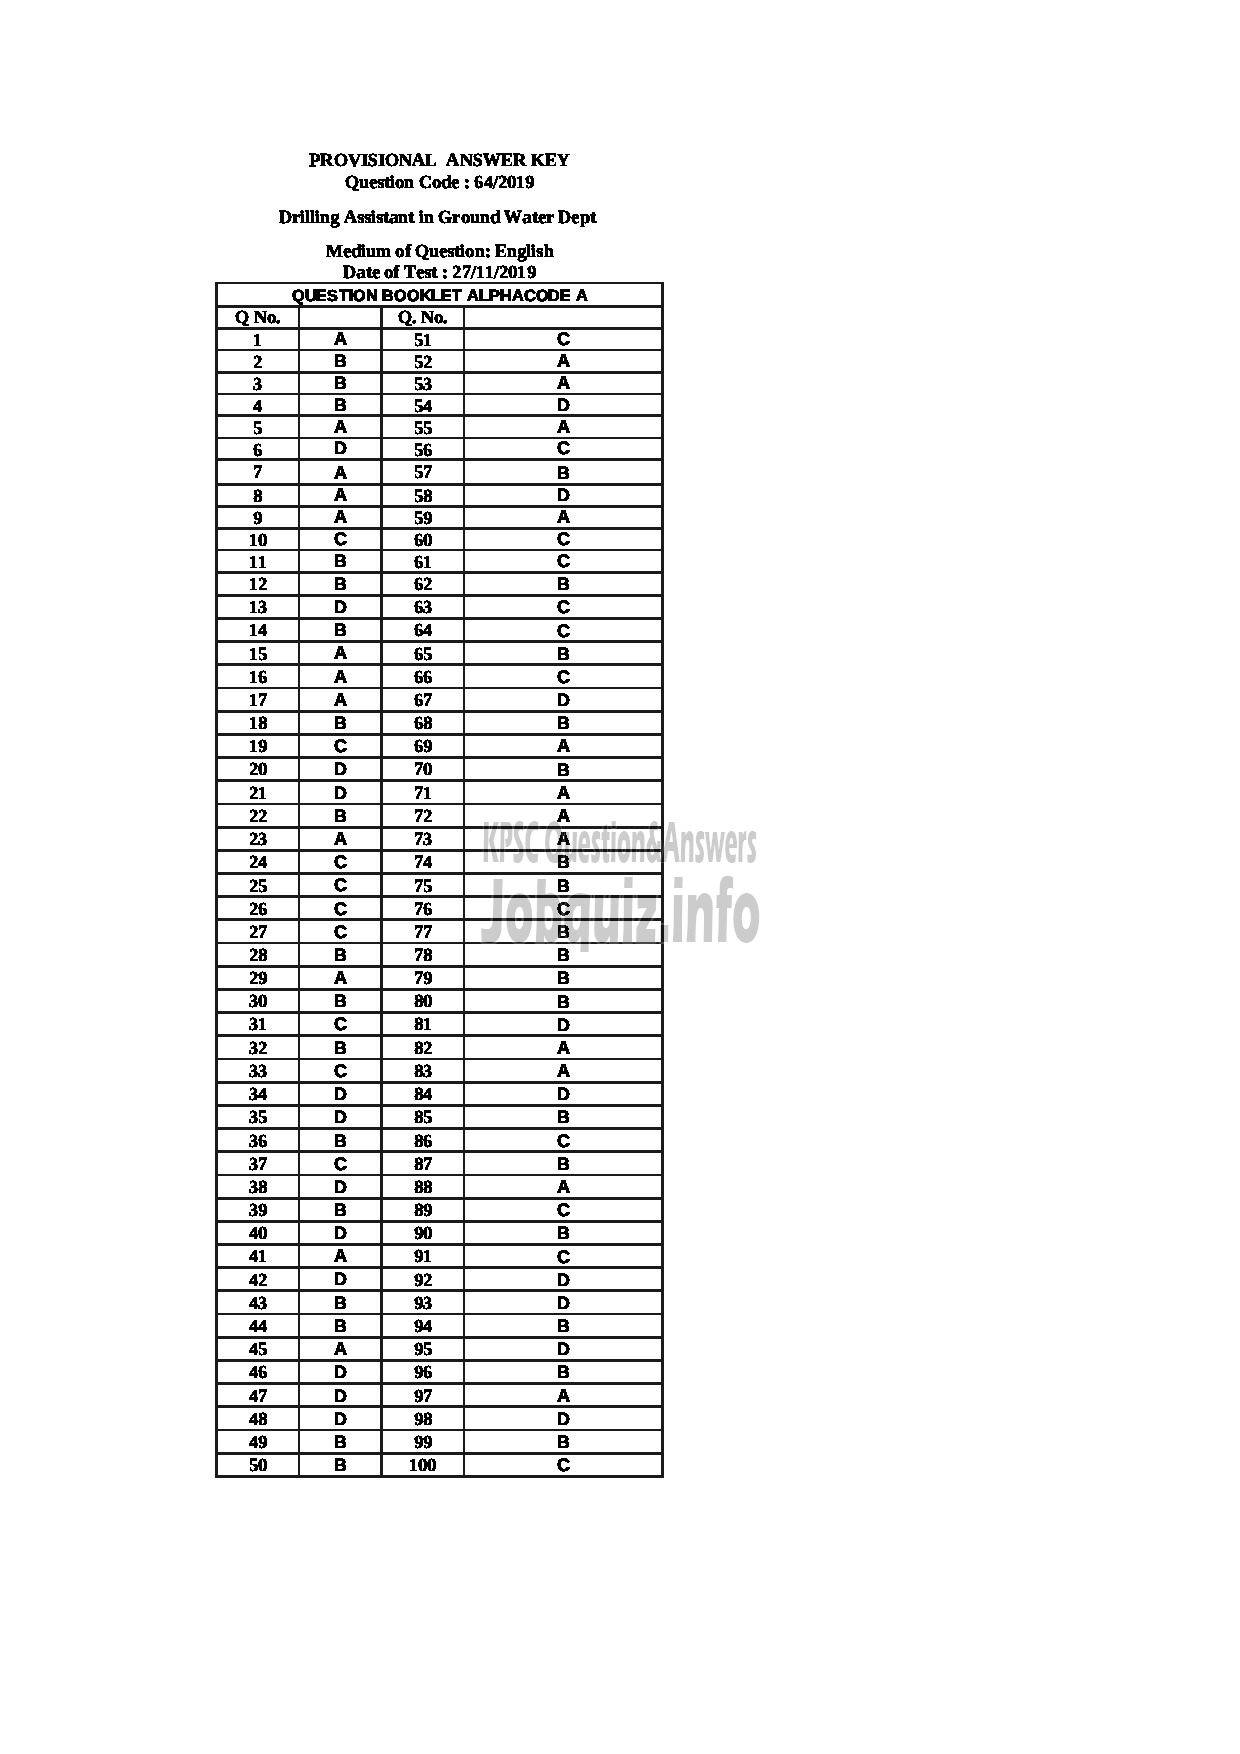 Kerala PSC Answer Key - DRILLING ASSISTANT GROUND WATER DEPARTMENT English 